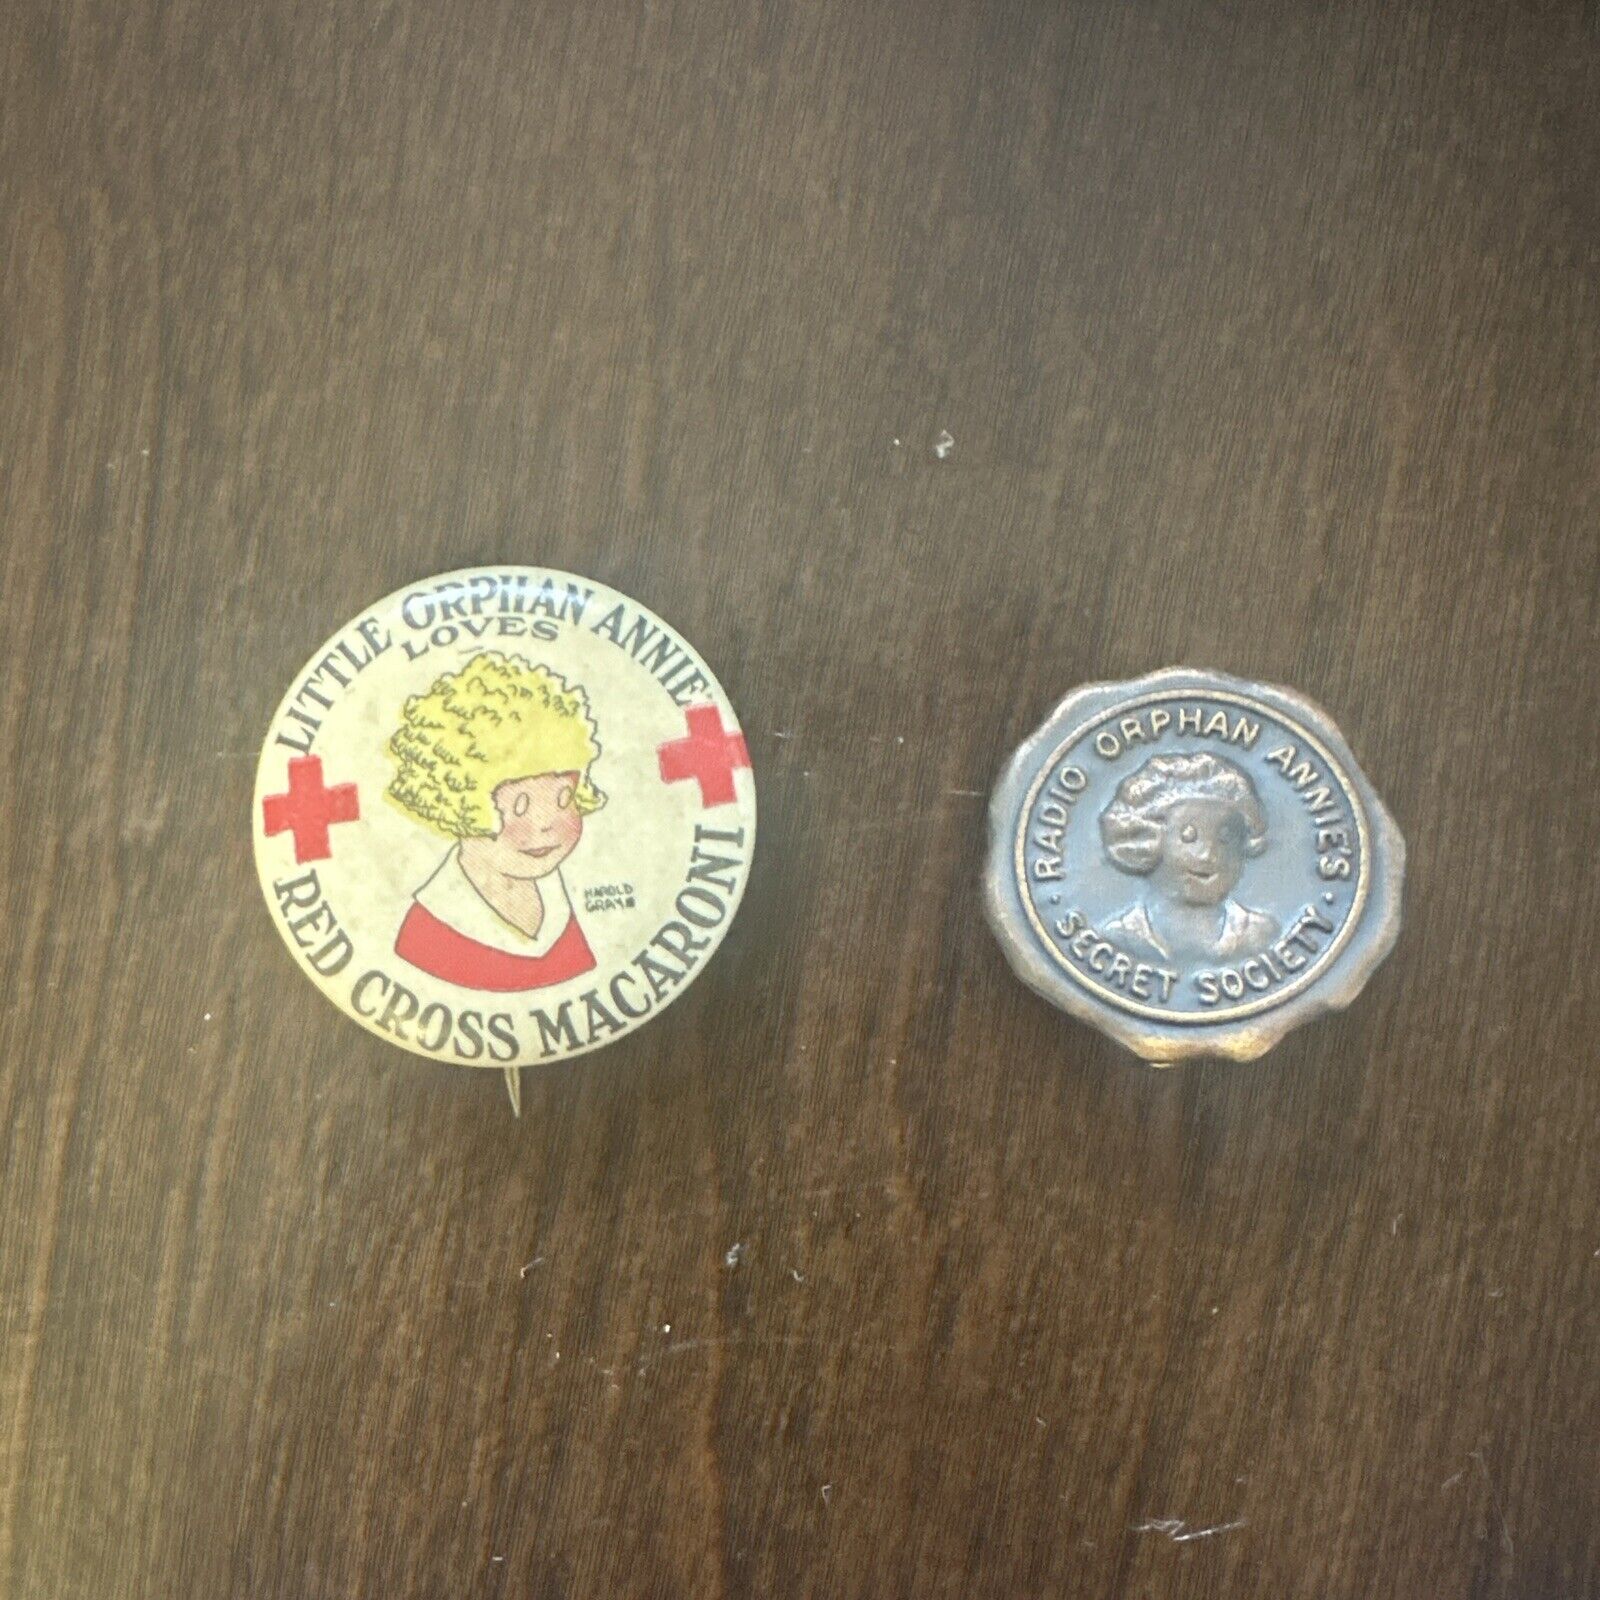 LITTLE ORPHAN ANNIE PINS Buttons Secret Society, Red Cross Macaroni